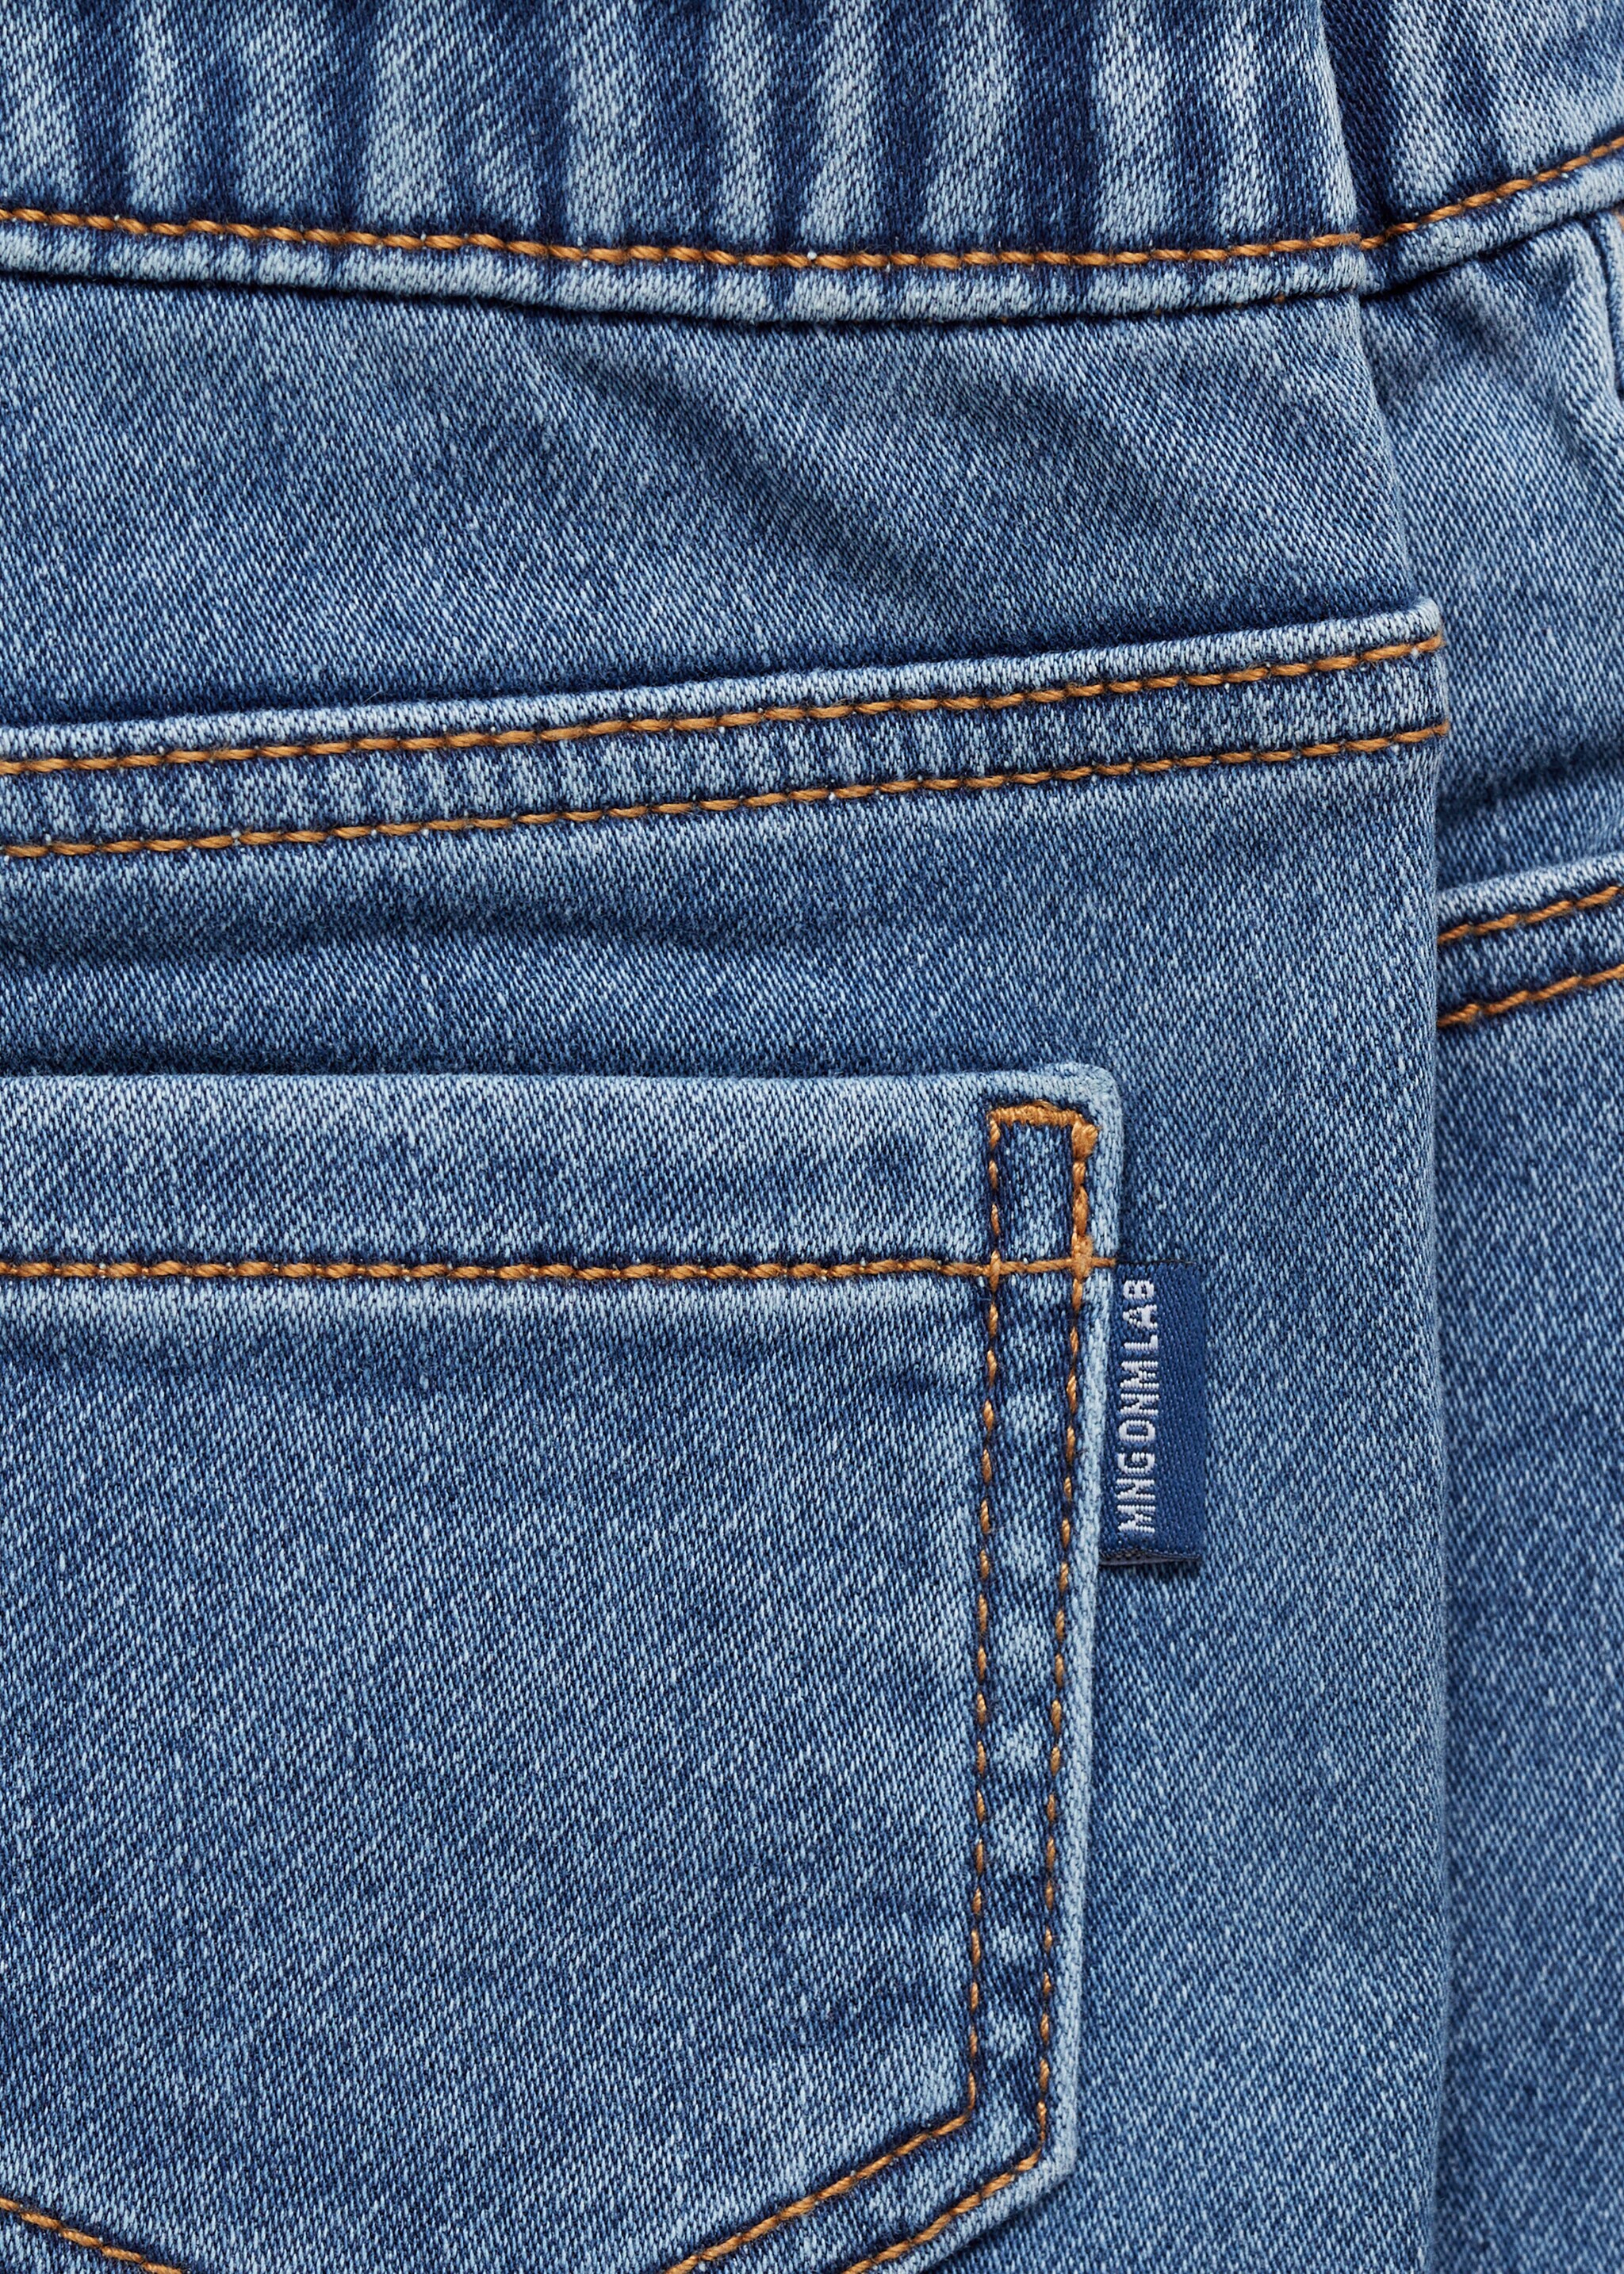 Drawstring waist jeans - Details of the article 0